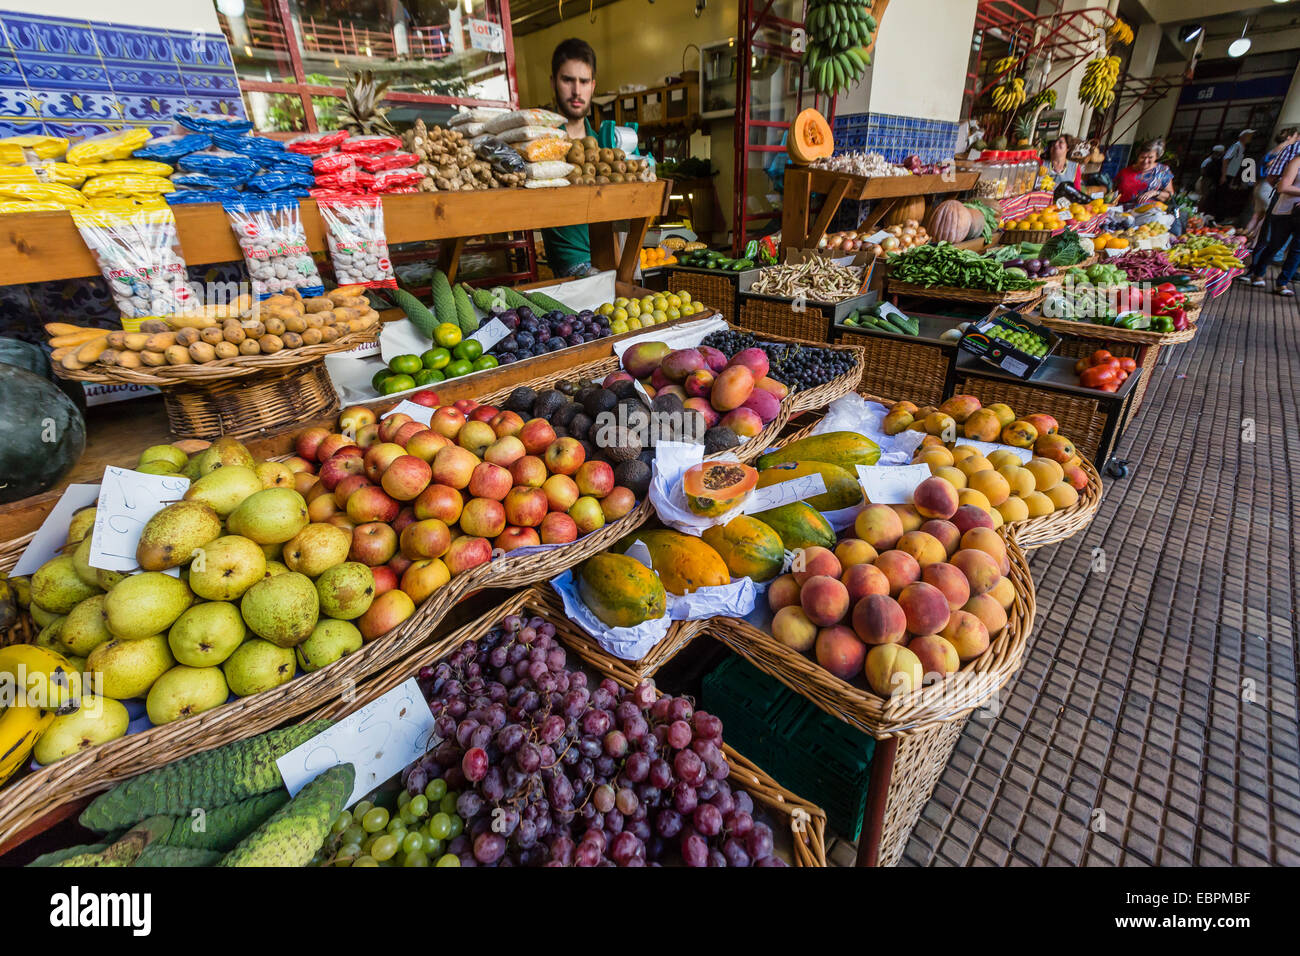 Vendors inside the Funchal Market, where fresh produce and fish are sold in Funchal, Madeira, Portugal, Europe Stock Photo